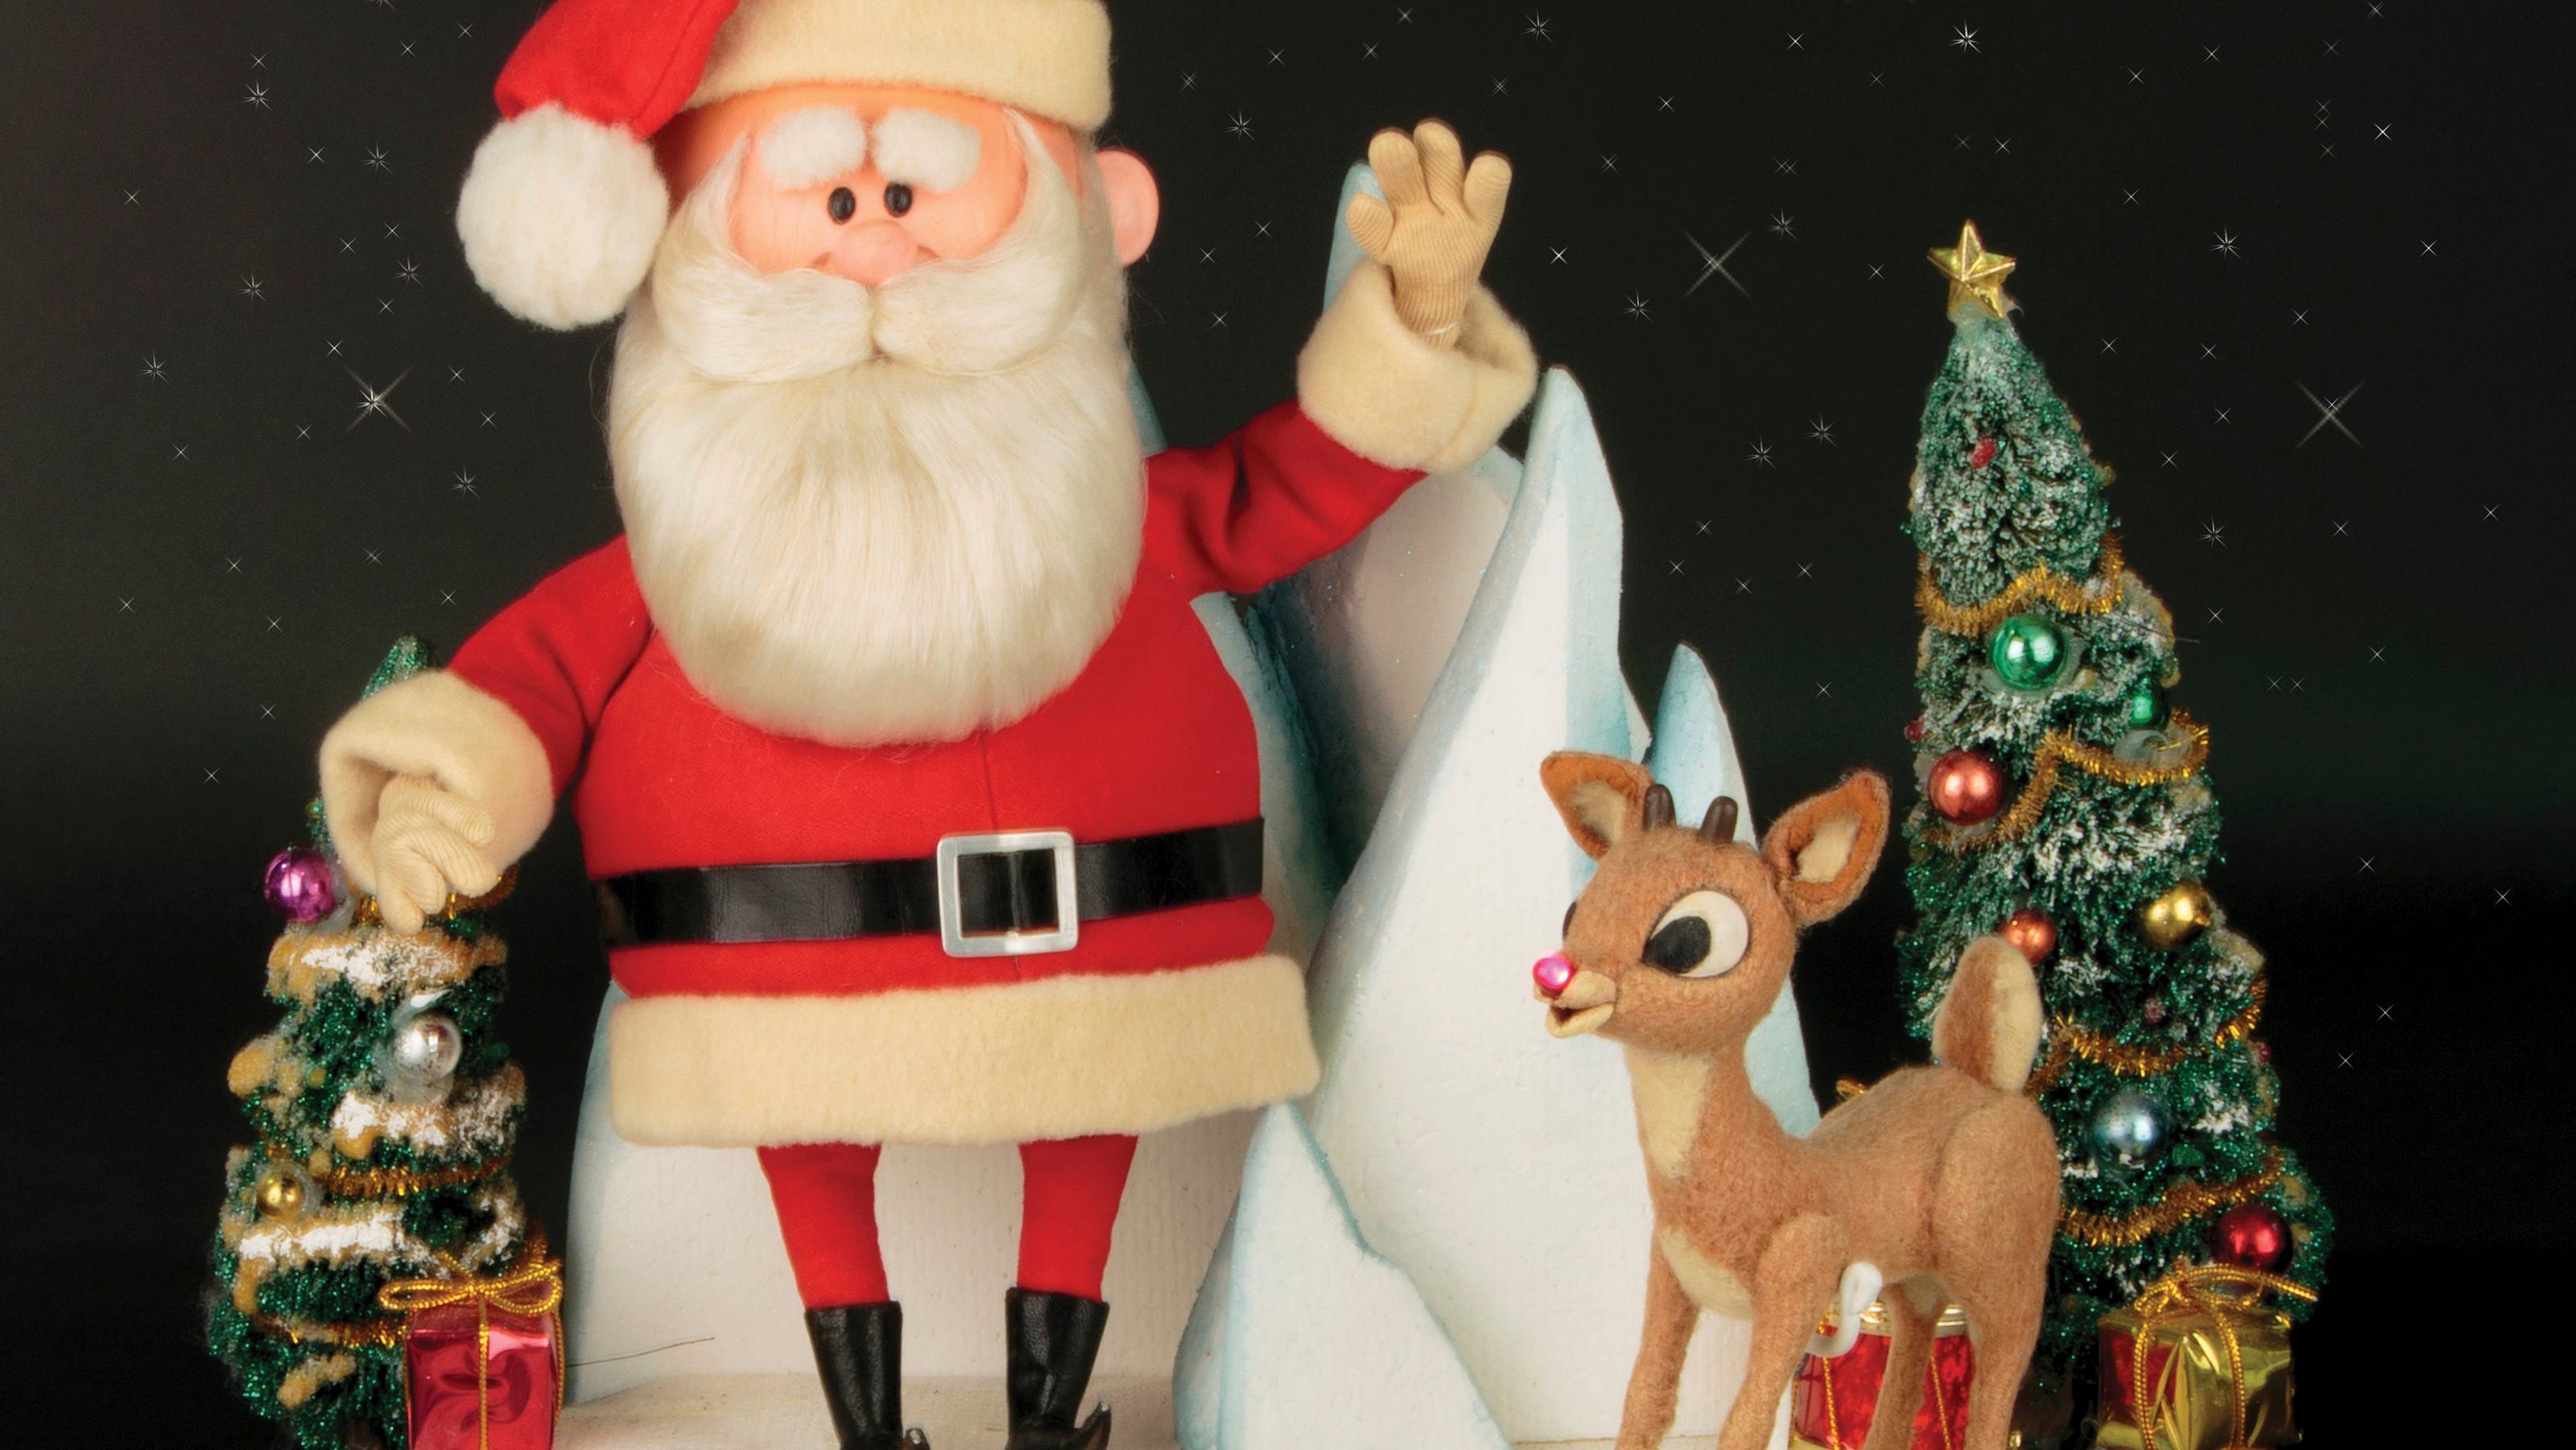 Rudolph, Santa figures from TV holiday special soar to sale of $368,000 at ...